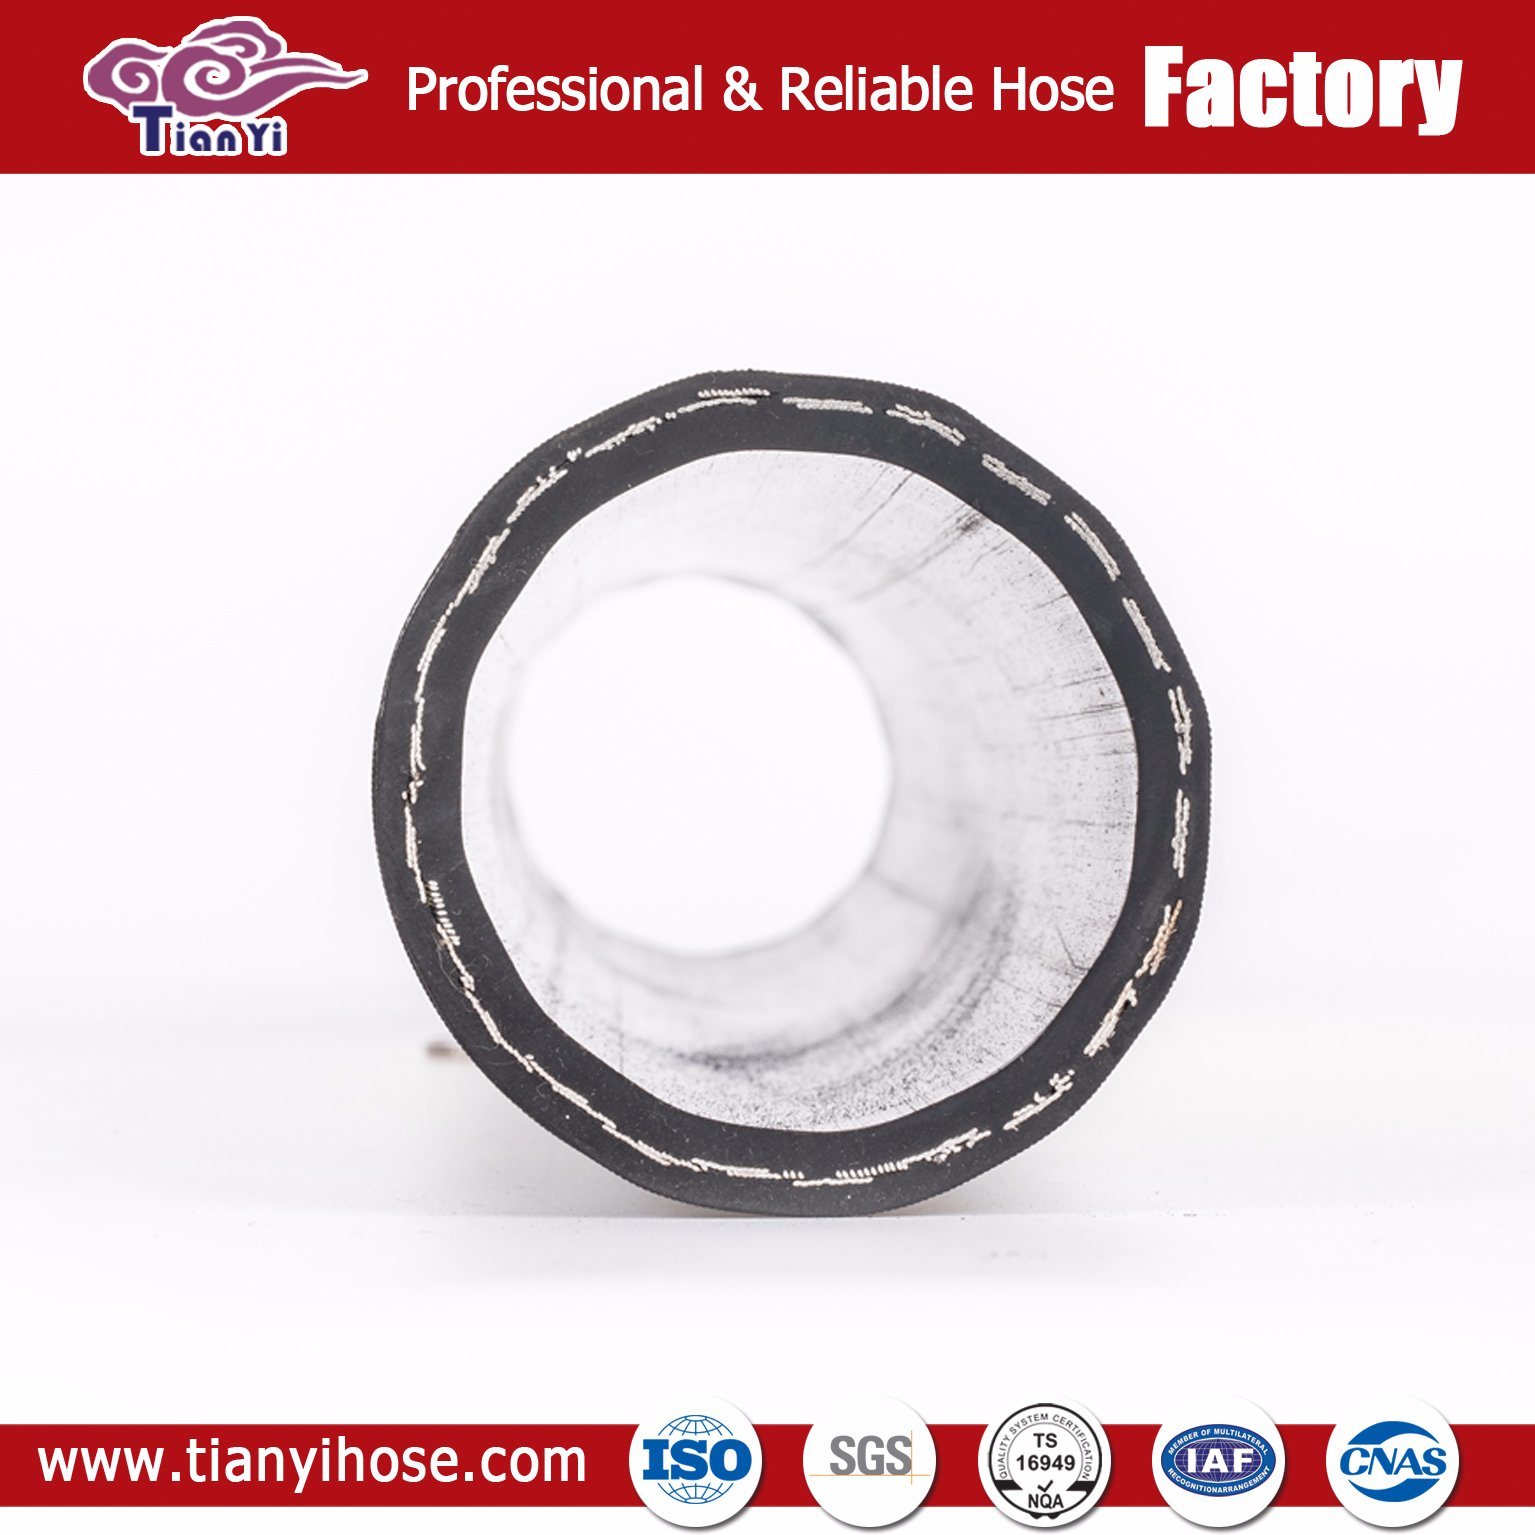 DIN En853 1sn Rubber Hydraulic Hose for Agricultural Machinery